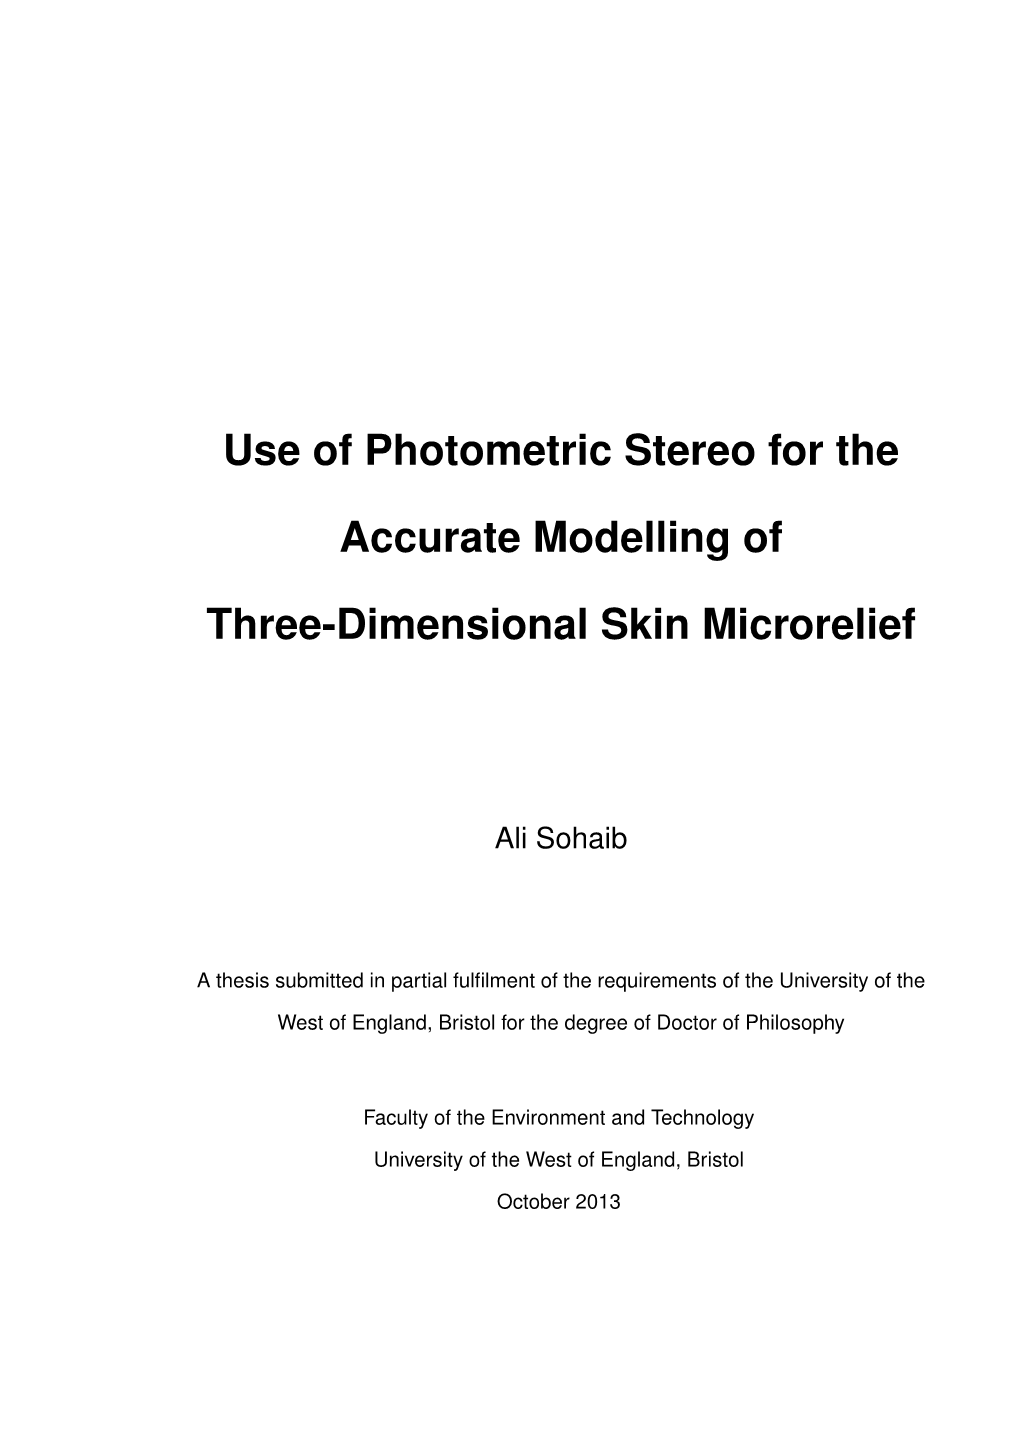 Use of Photometric Stereo for the Accurate Modelling of Three